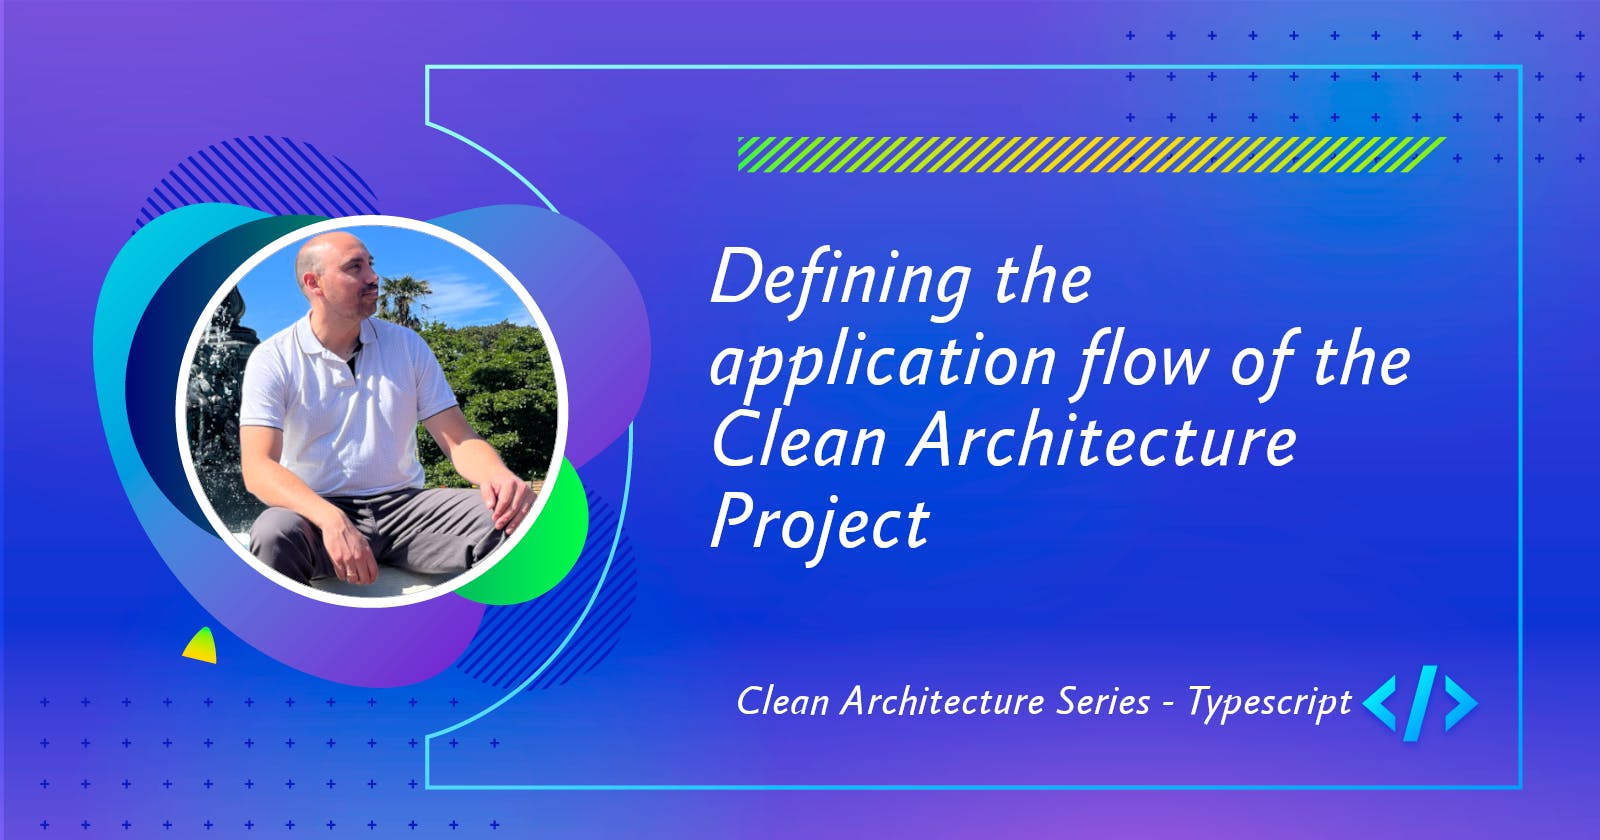 Defining the application flow of the Clean Architecture Project